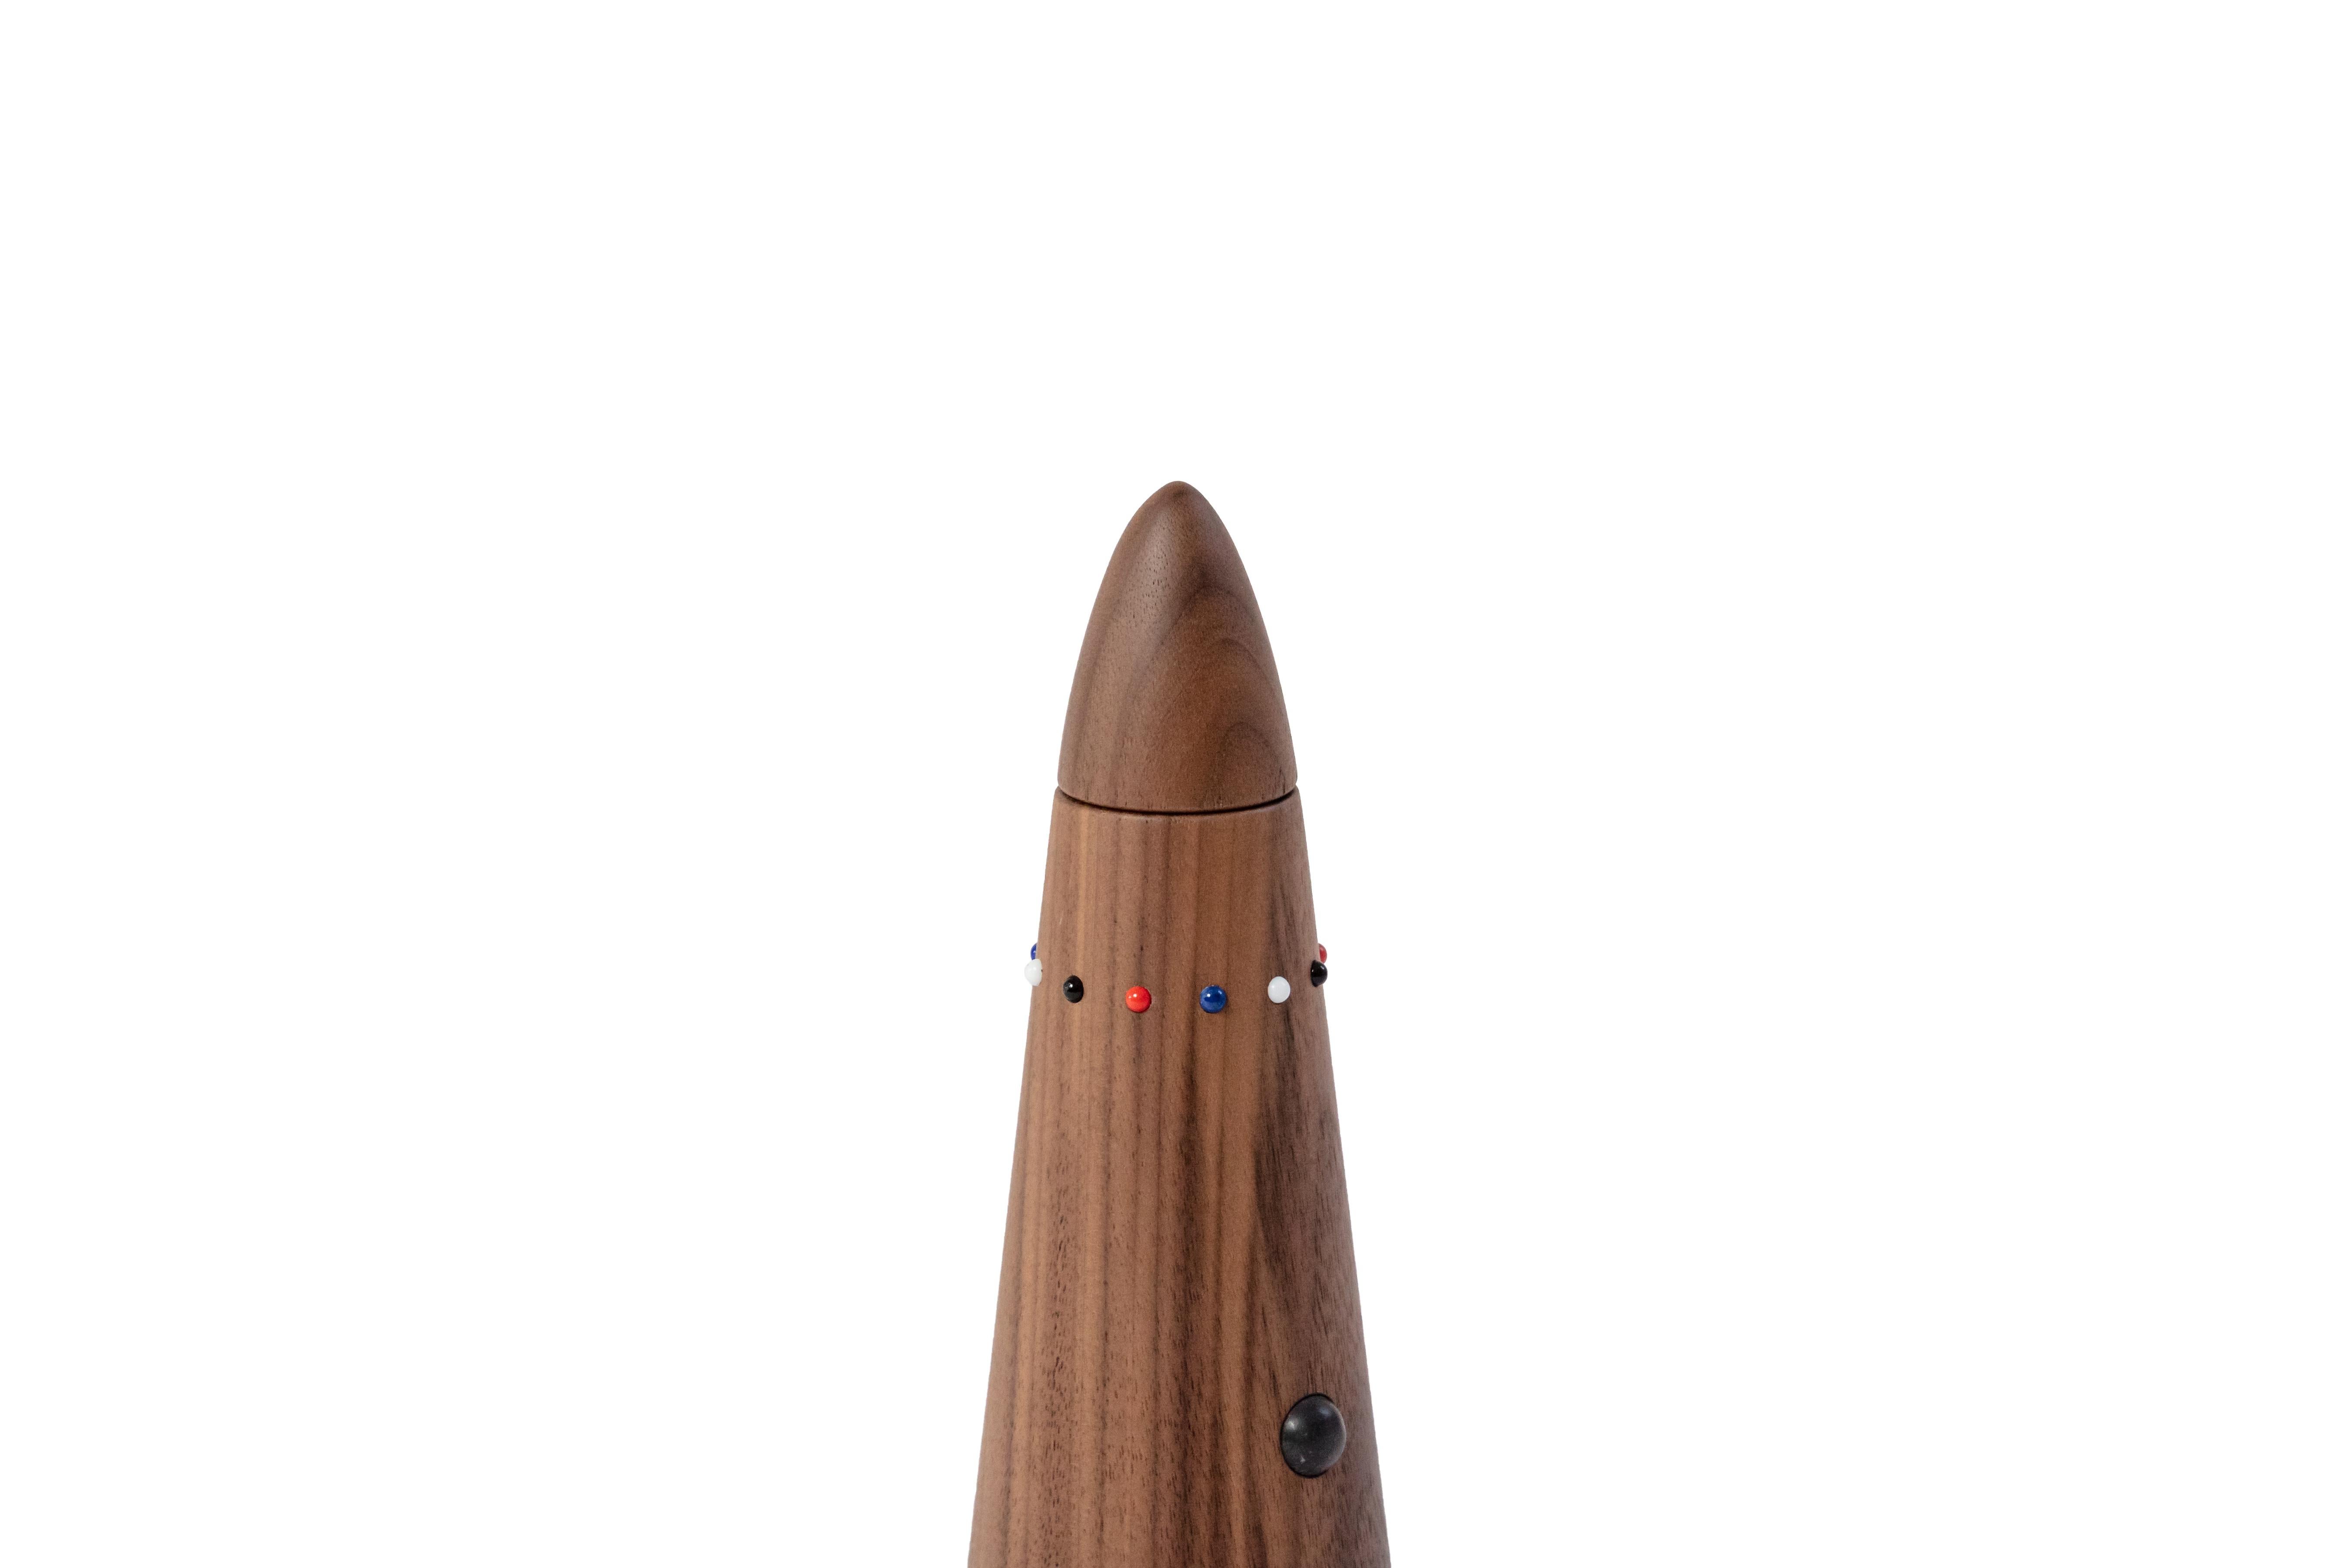 Ceramic Salt mill and pepper grinder set in walnut wood from the SoShiro Pok collection For Sale